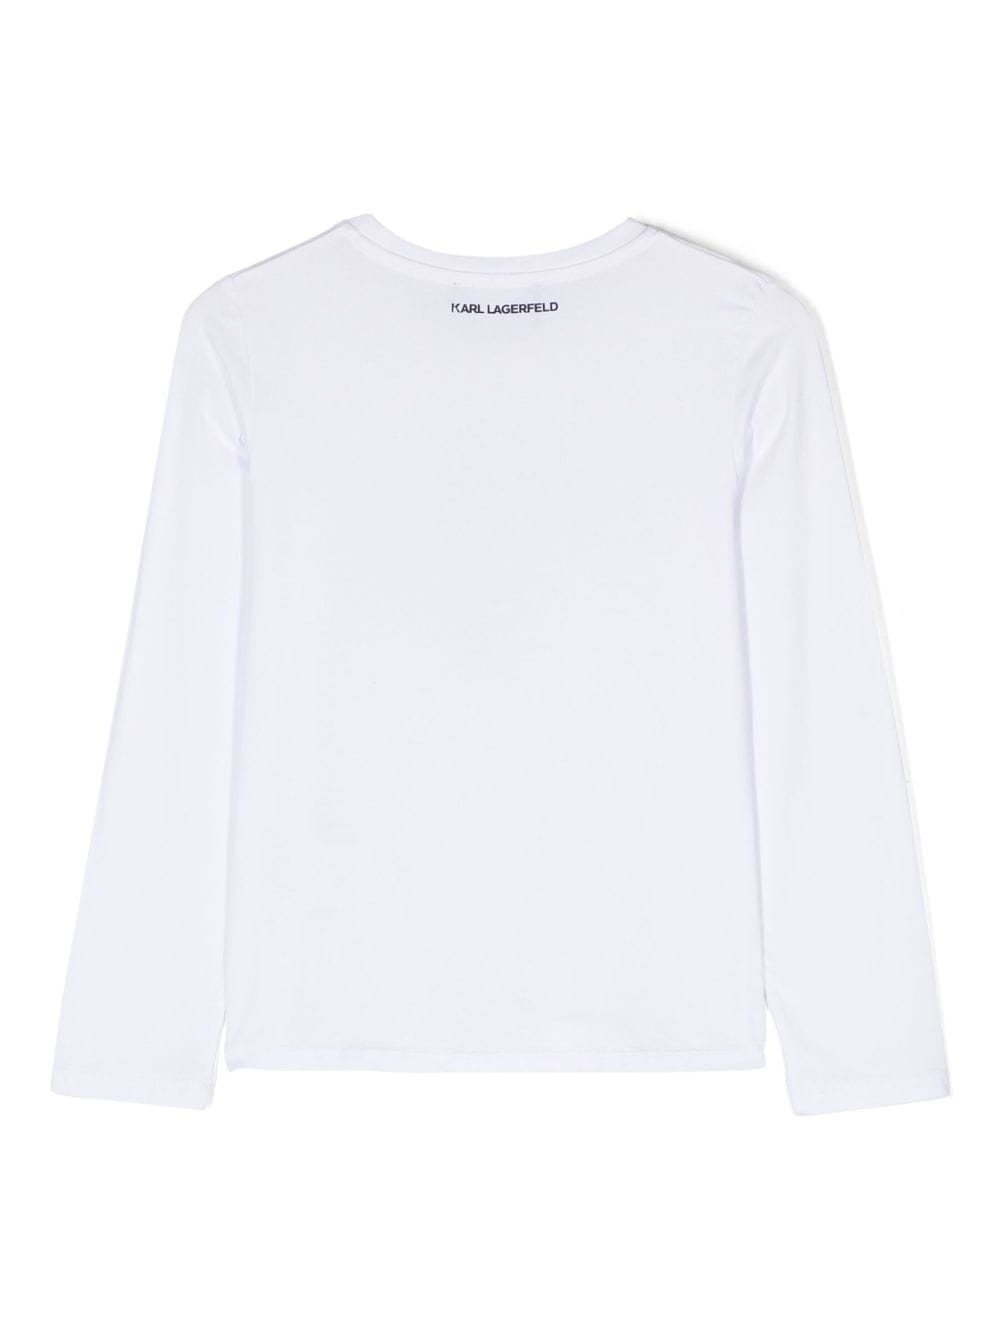 Choupette white cotton and modal girl KARL LAGERFELD t-shirt